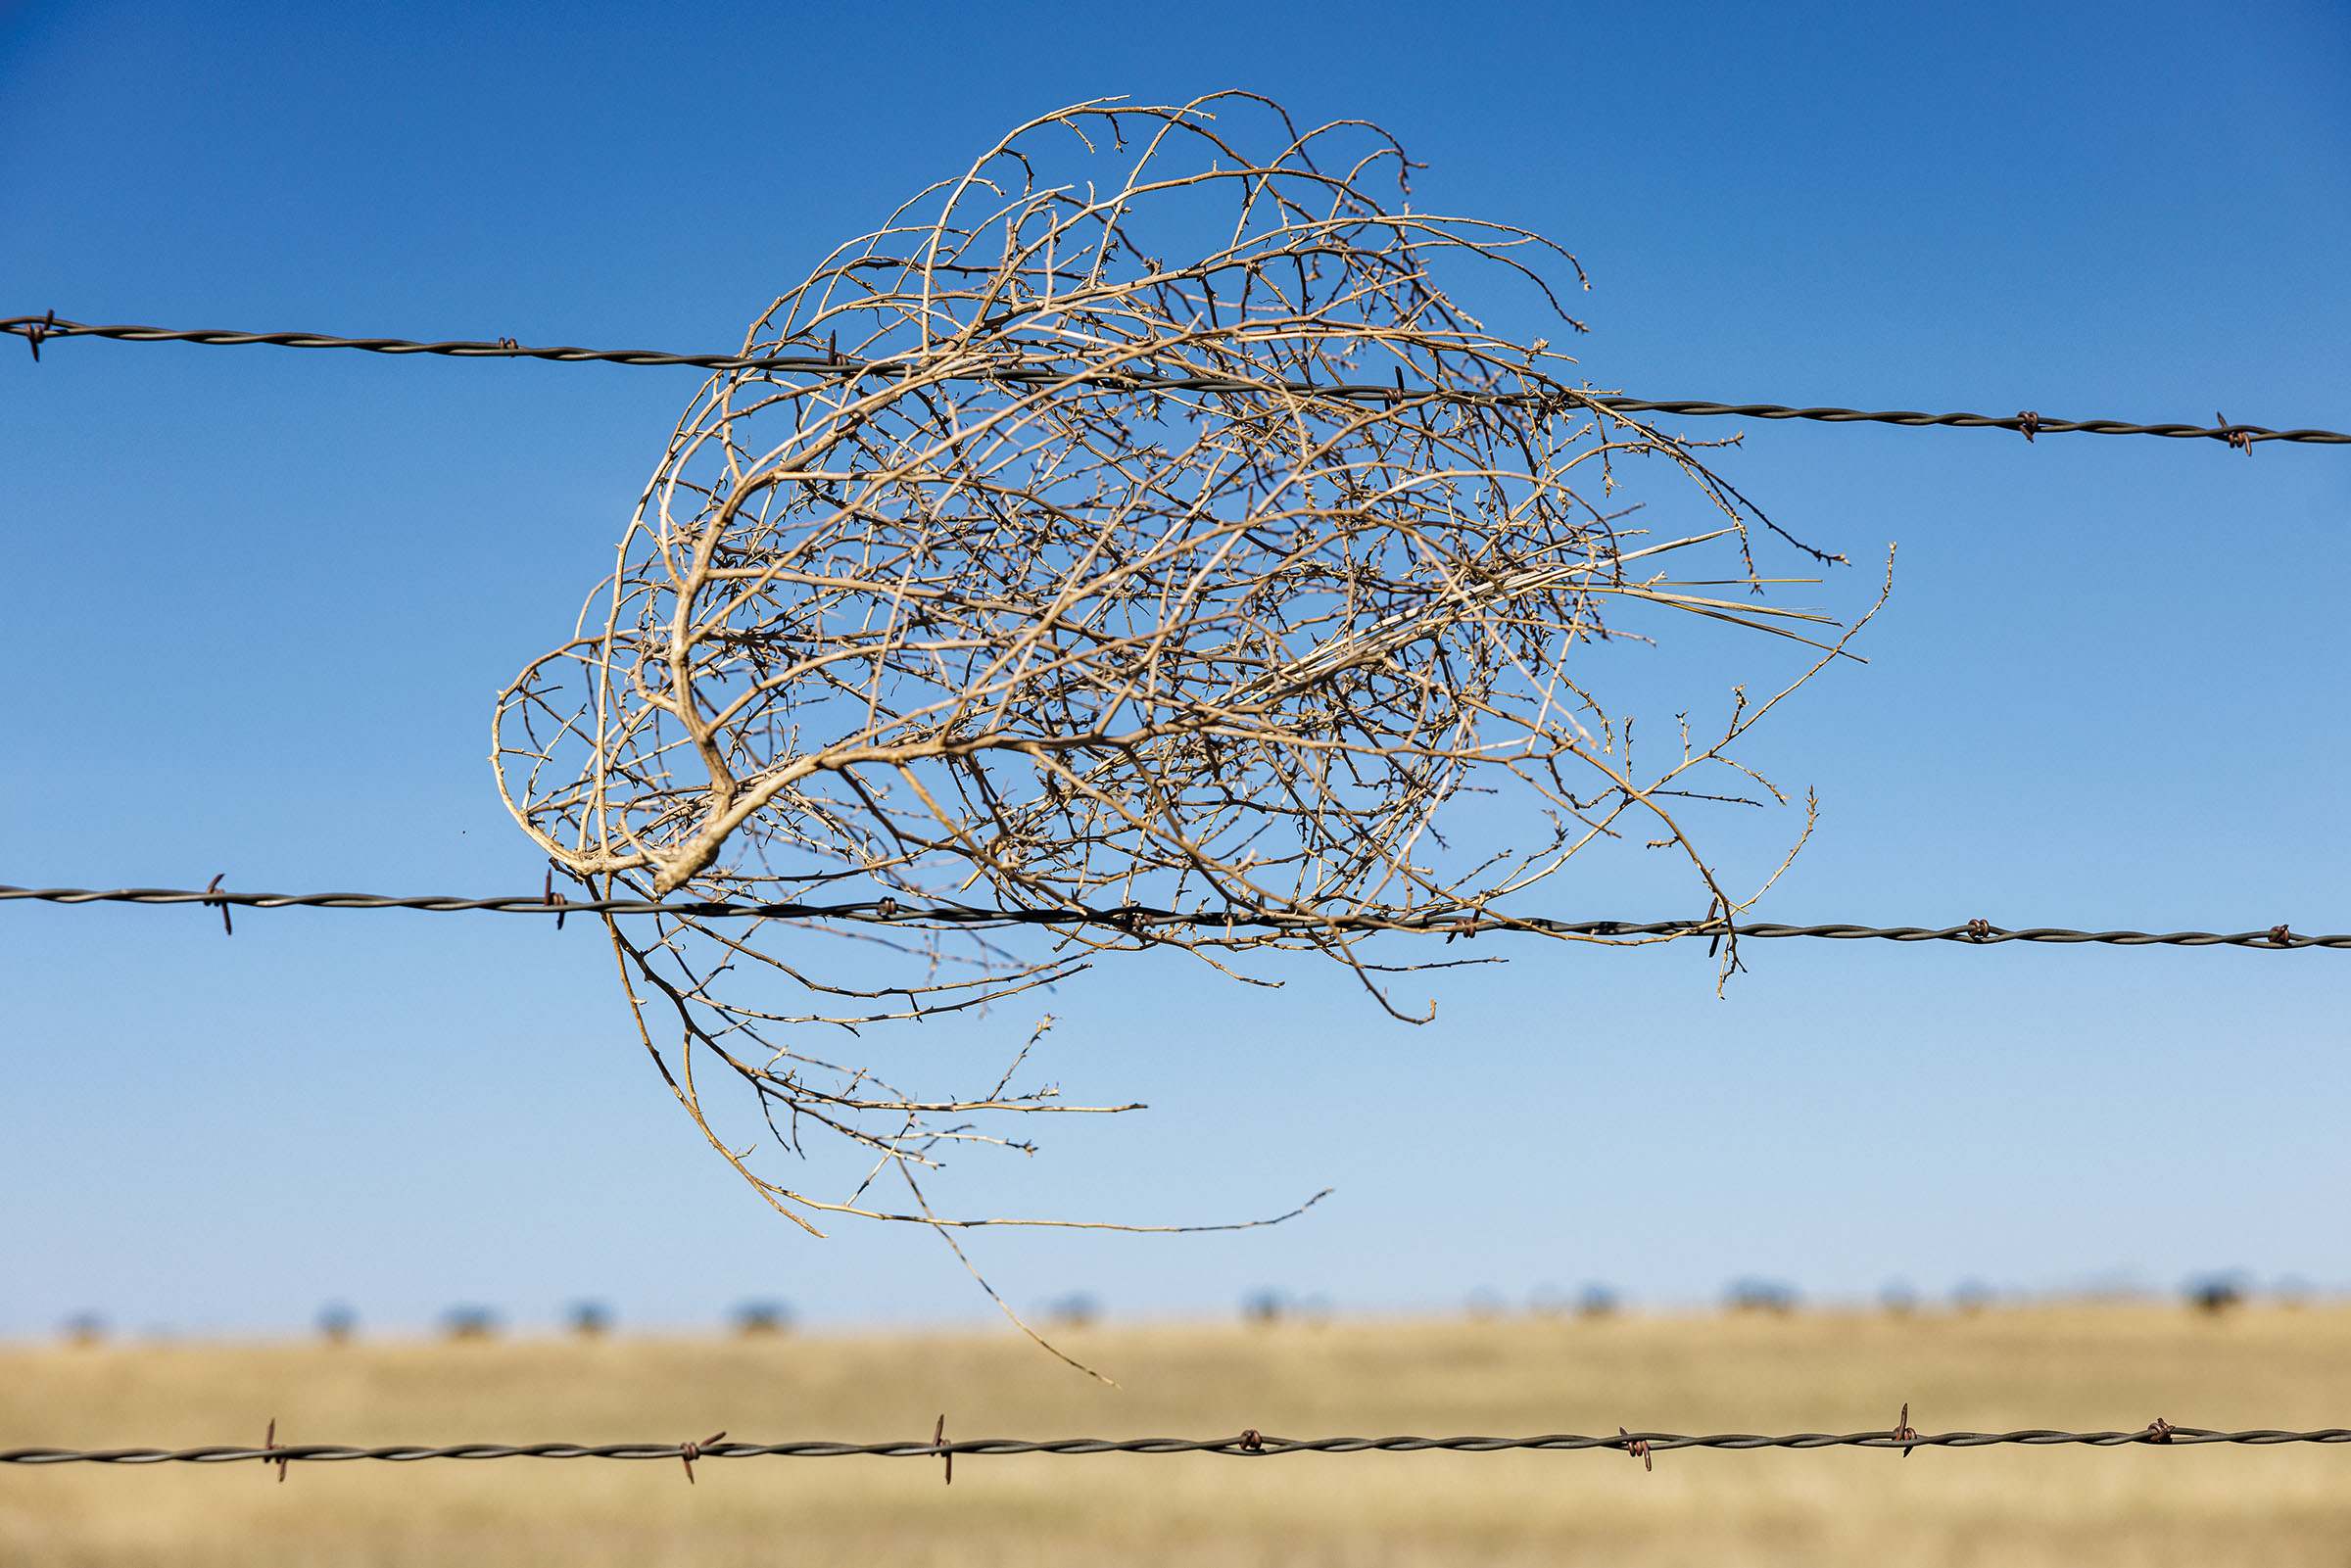 A tan tumbleweed gets caught in the dark metal barbs of a fence in front of a deep blue sky